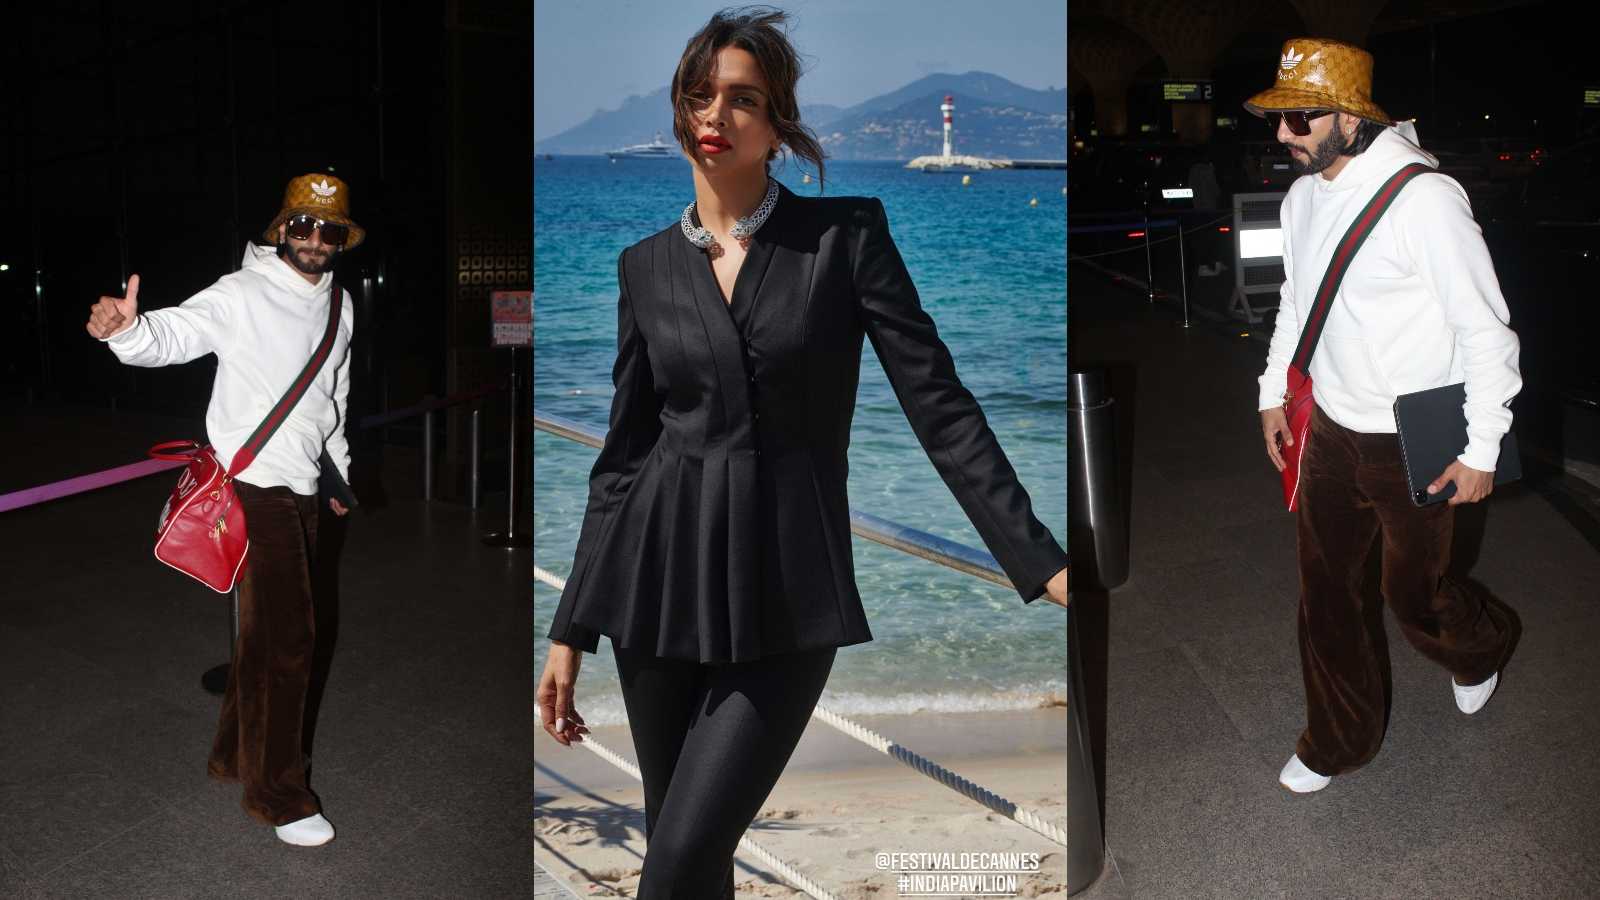 Ranveer Singh join Deepika Padukone at Cannes after being floored by her pictures from the French Riviera